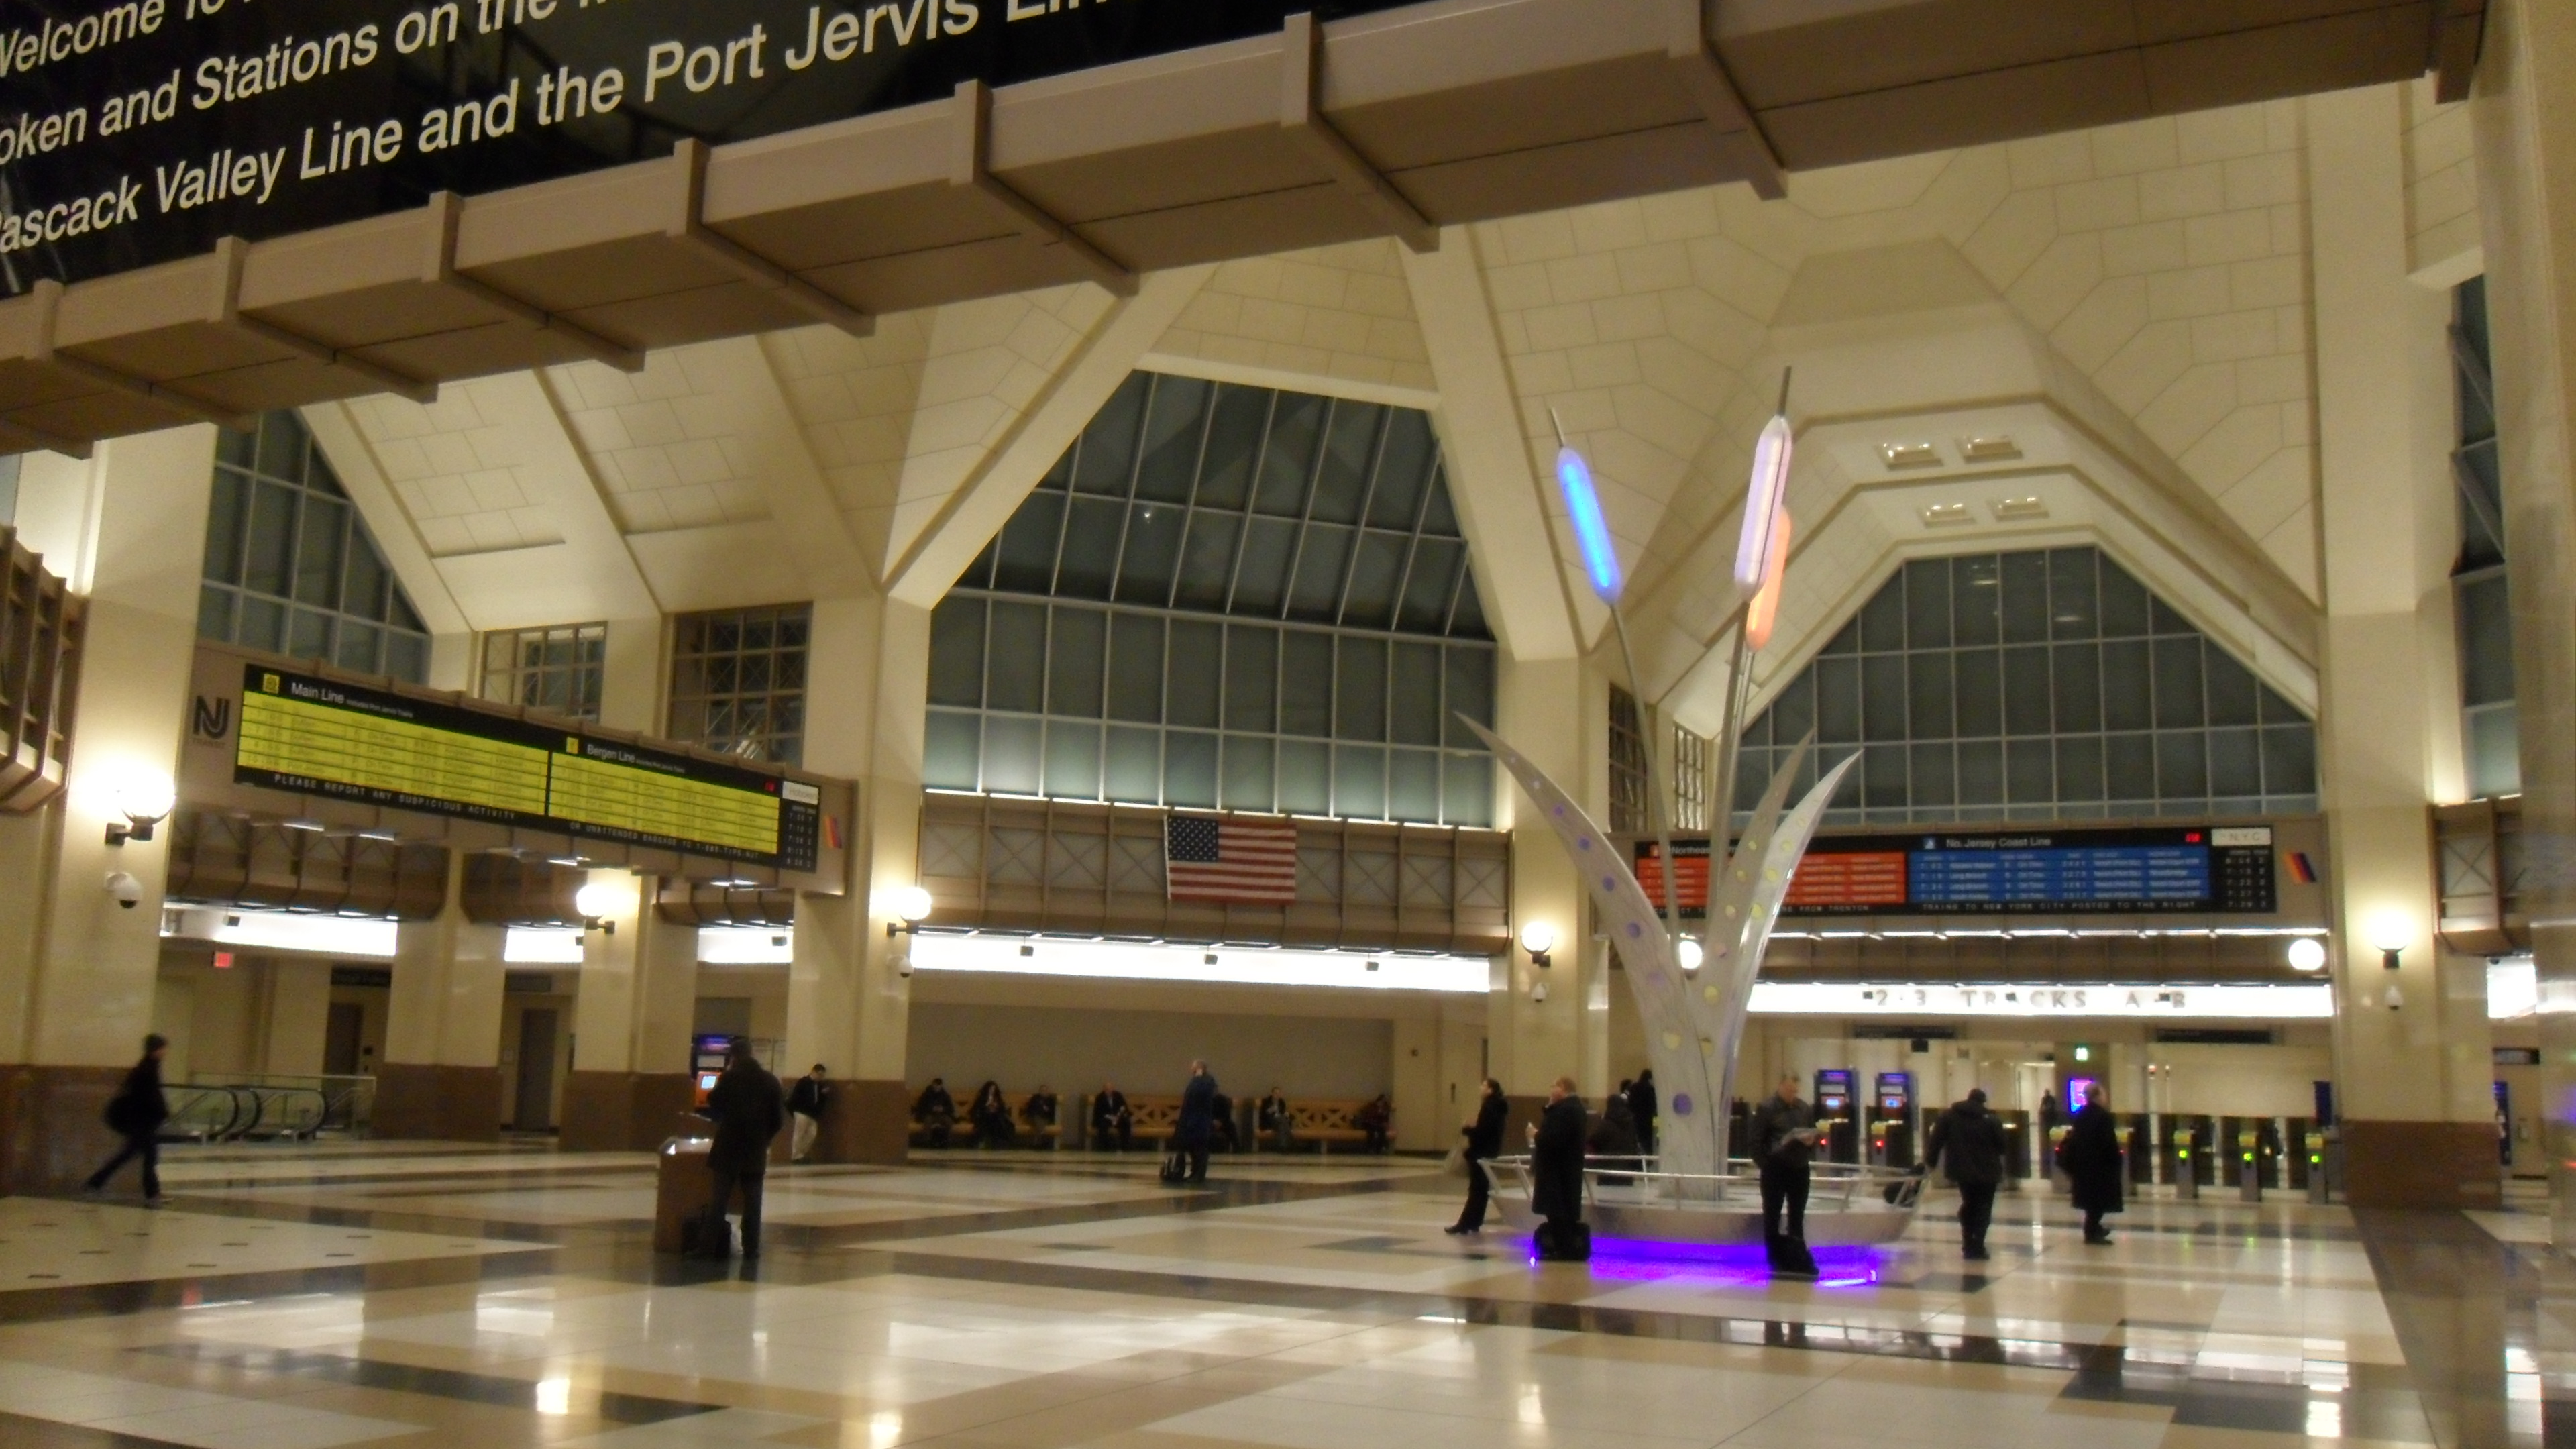 secaucus junction to penn station